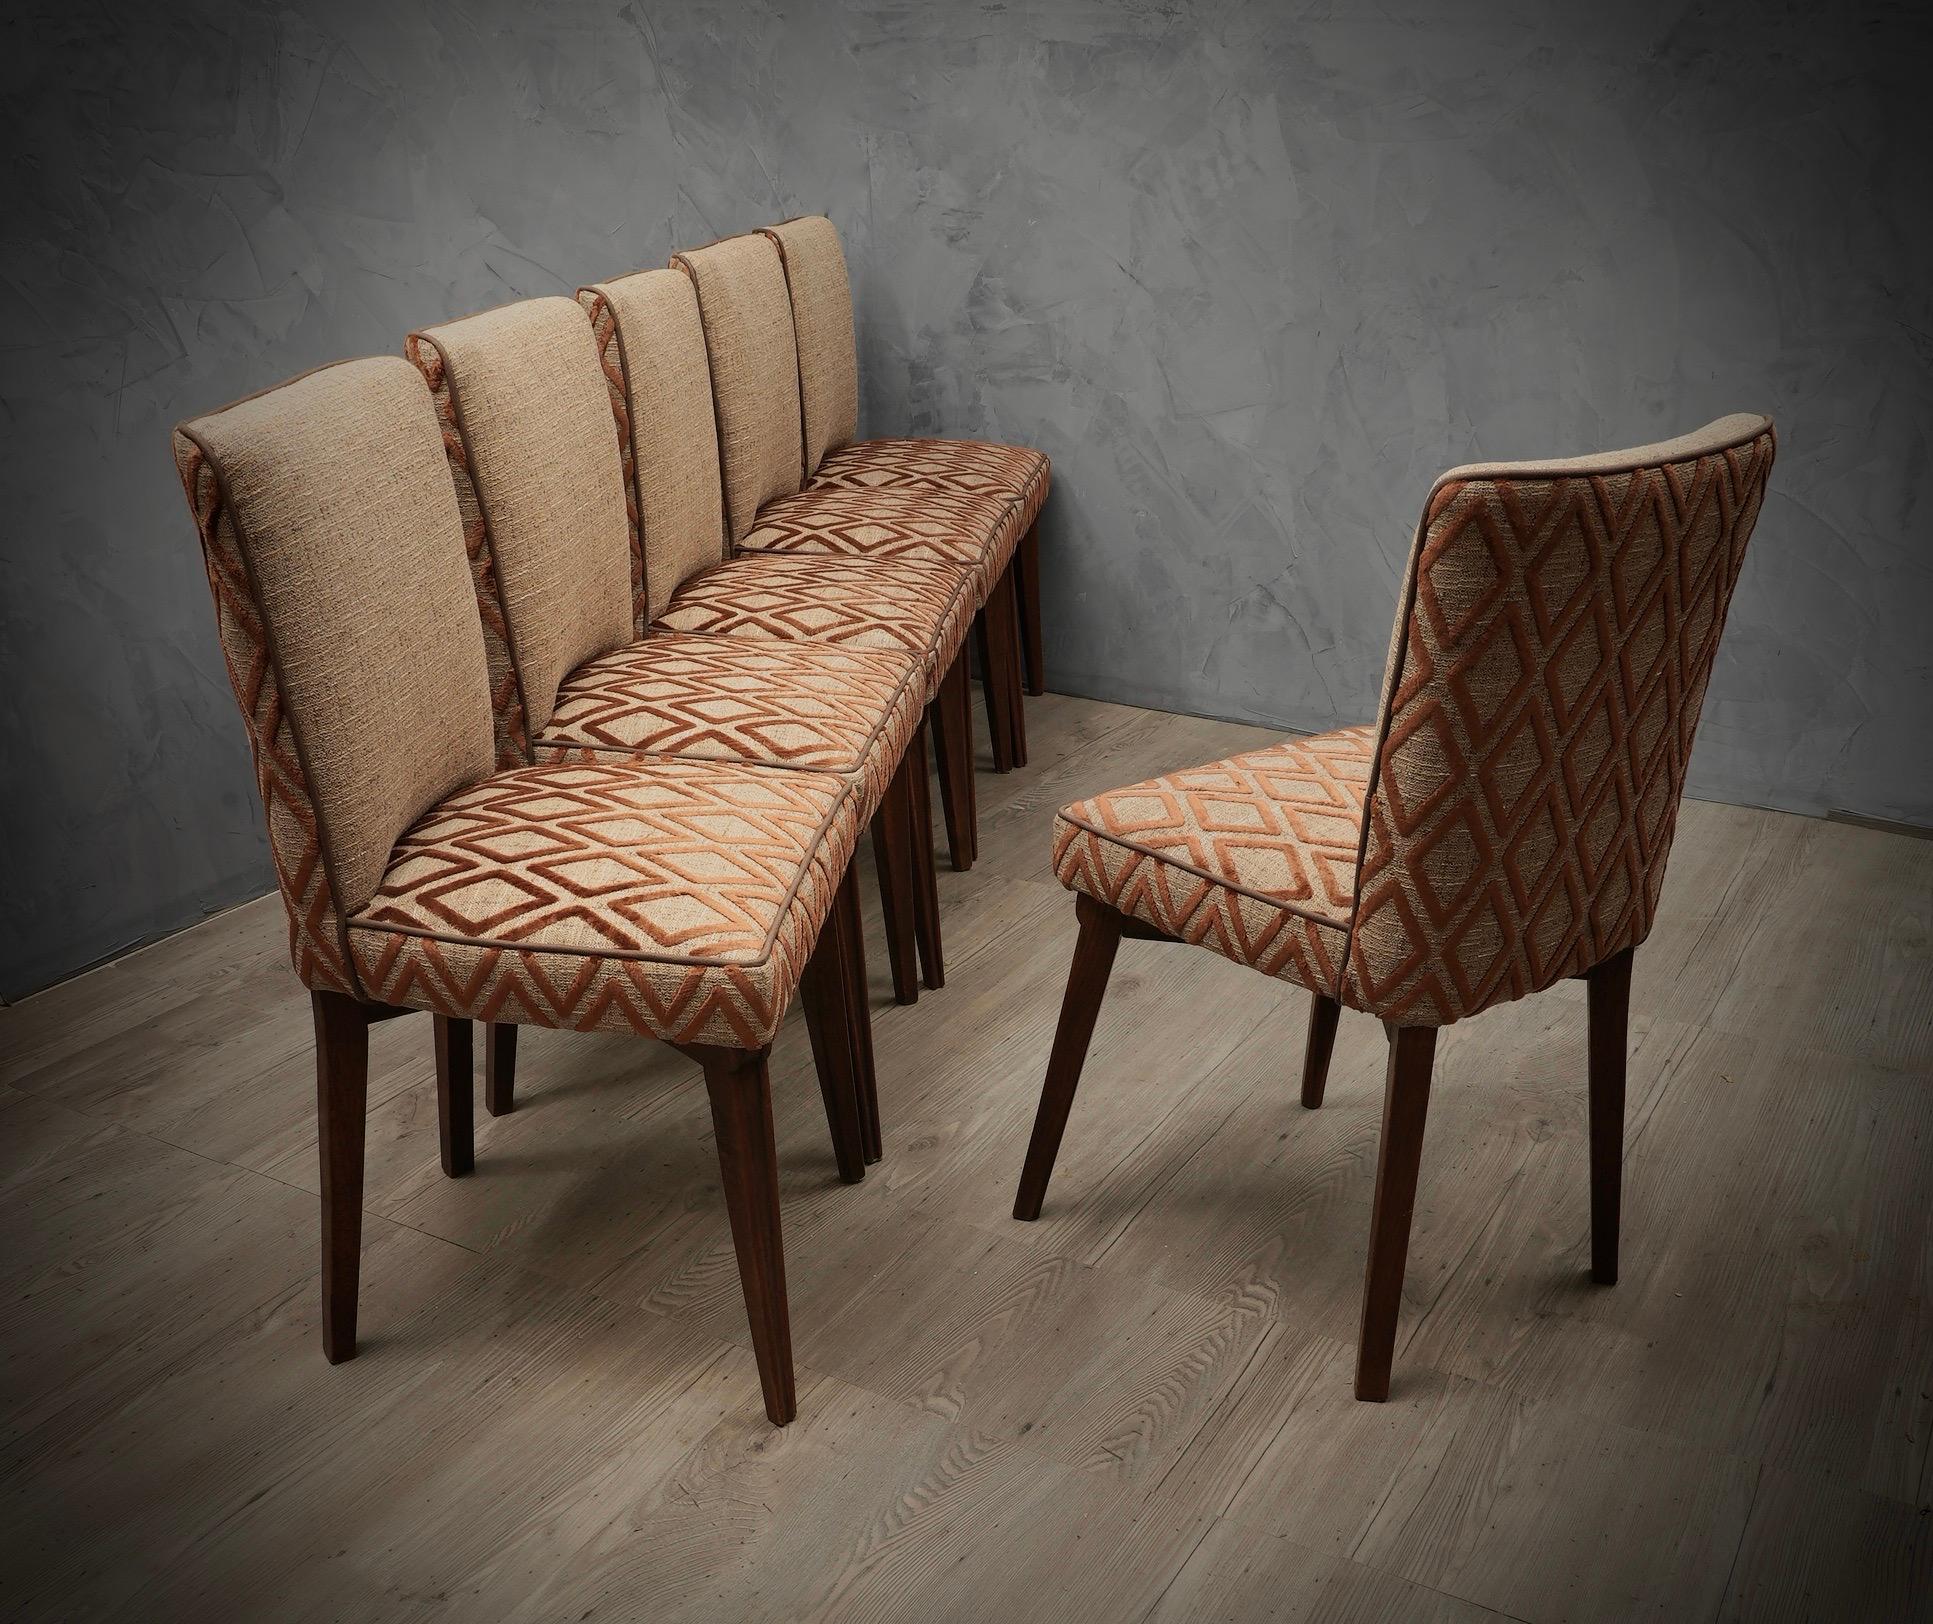 Pierluigi Colli Ash Wood and Brown Fabric Italian Dinning Room Chairs, 1950 For Sale 1